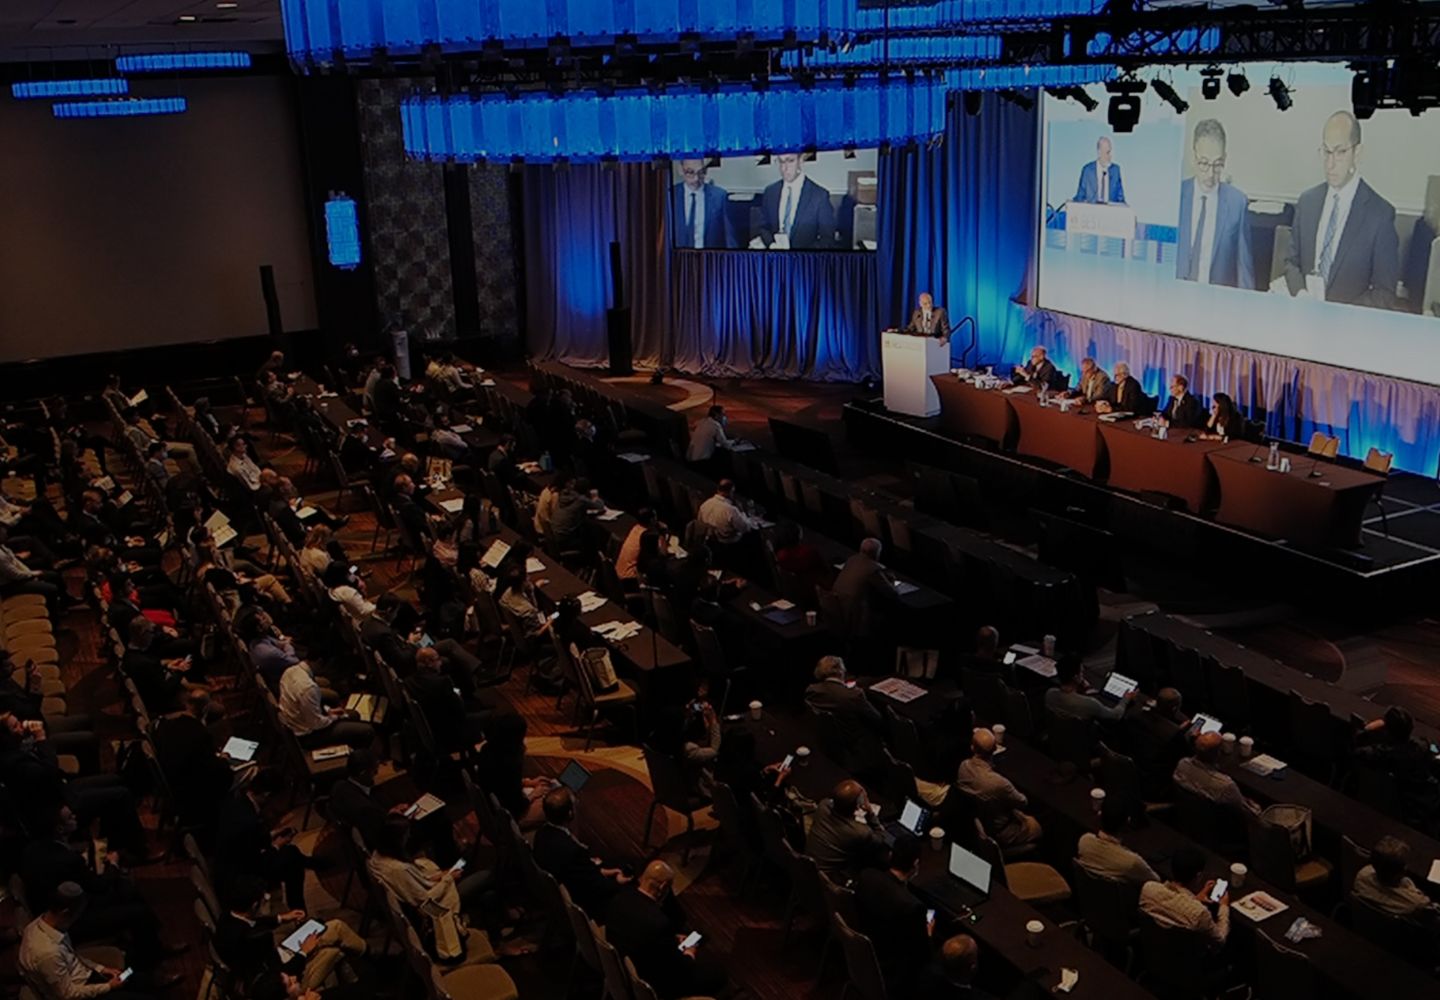 Global embolization and oncology symposium